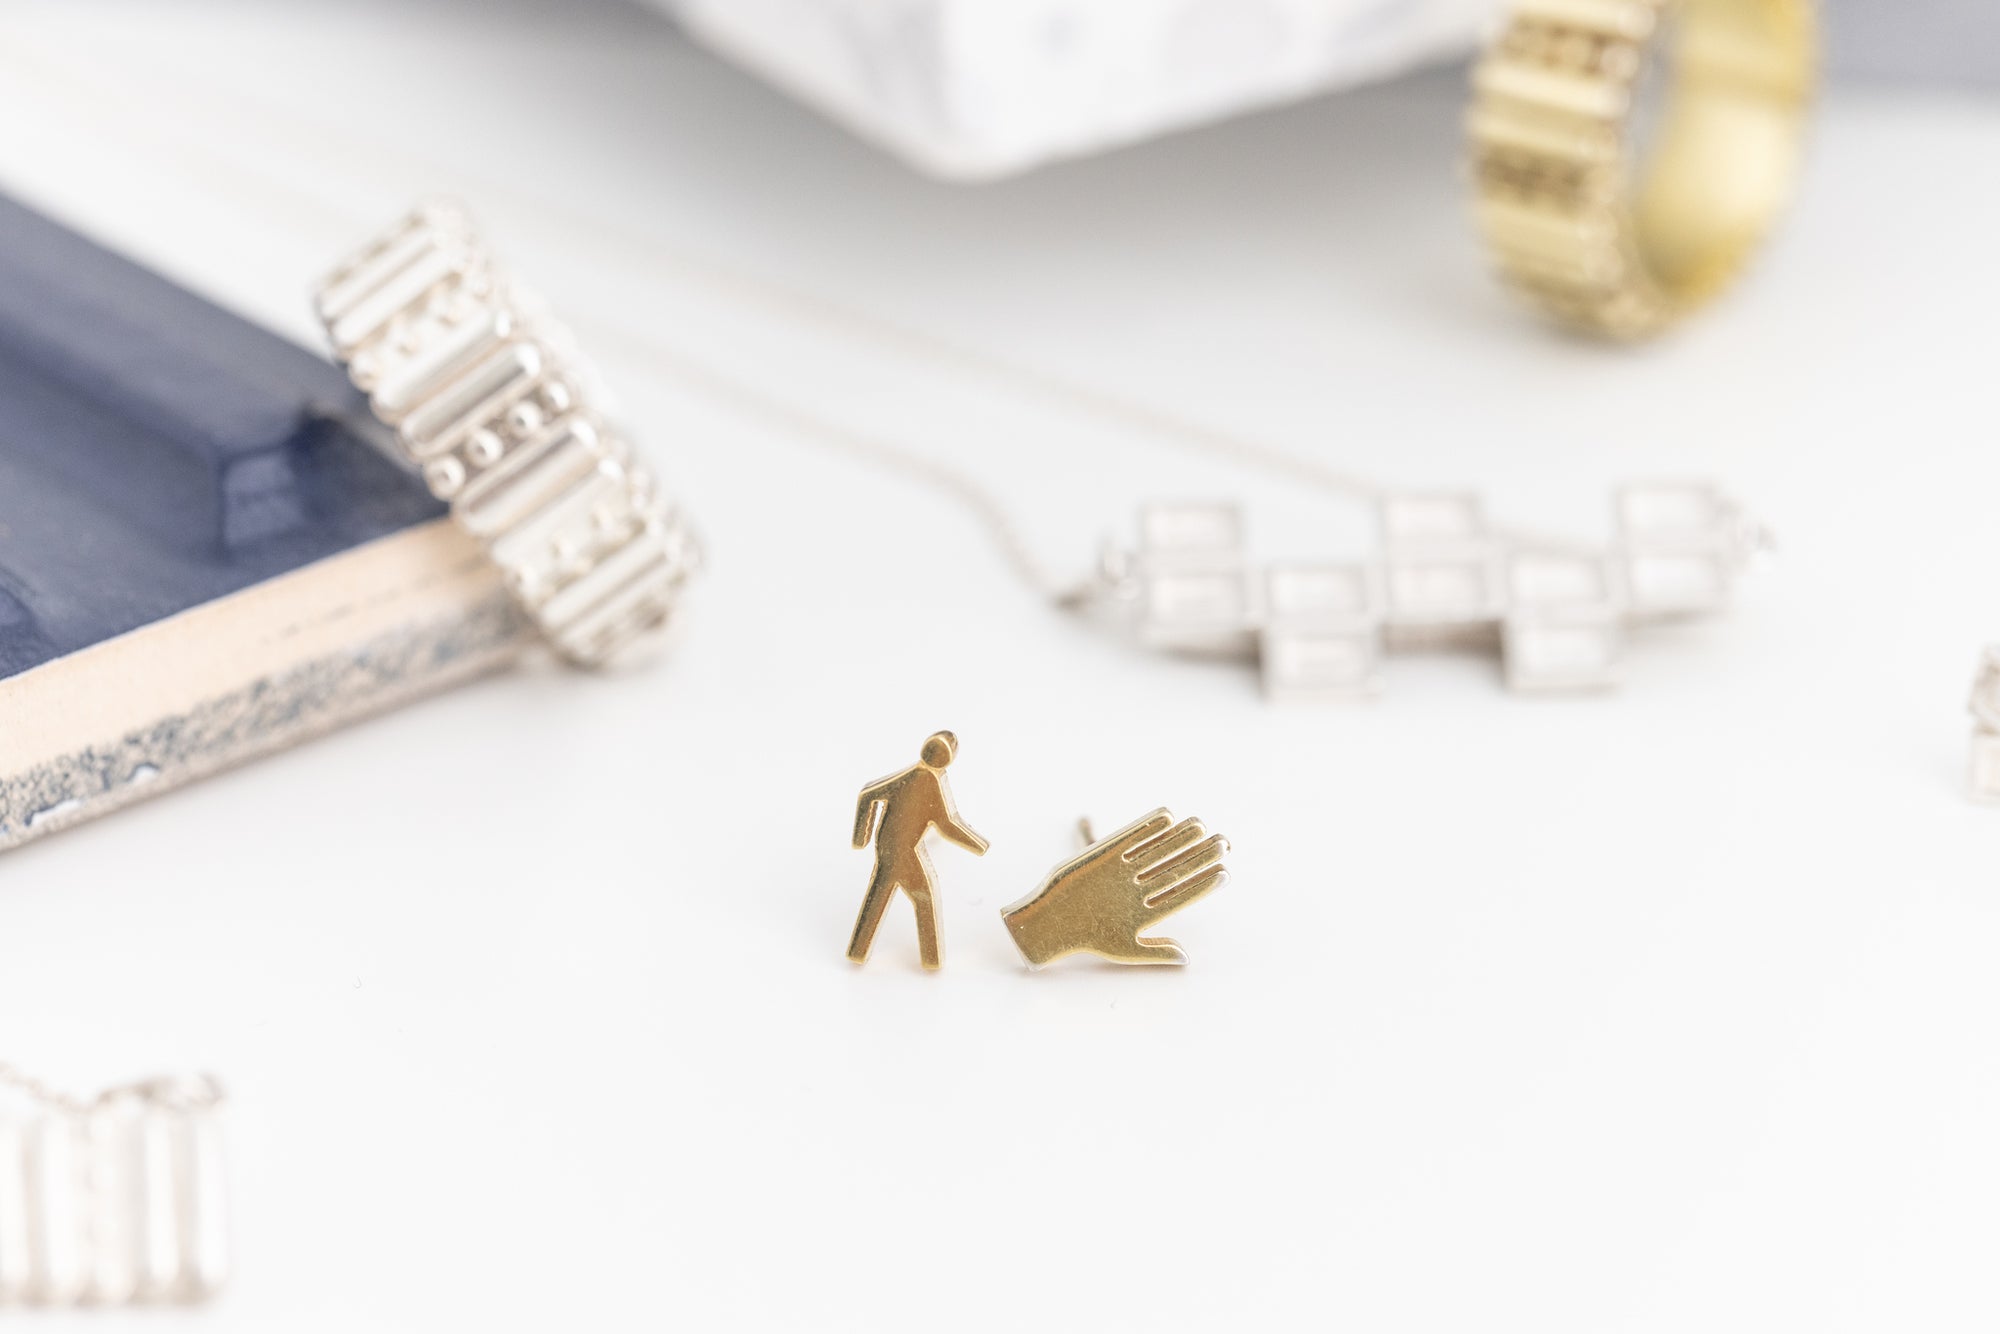 Close-up of 18k gold vermeil Crosswalk studs designed as walk sign human and hand icons, with Genji block ring on the left and concrete waffle necklace on the right in soft focus background.